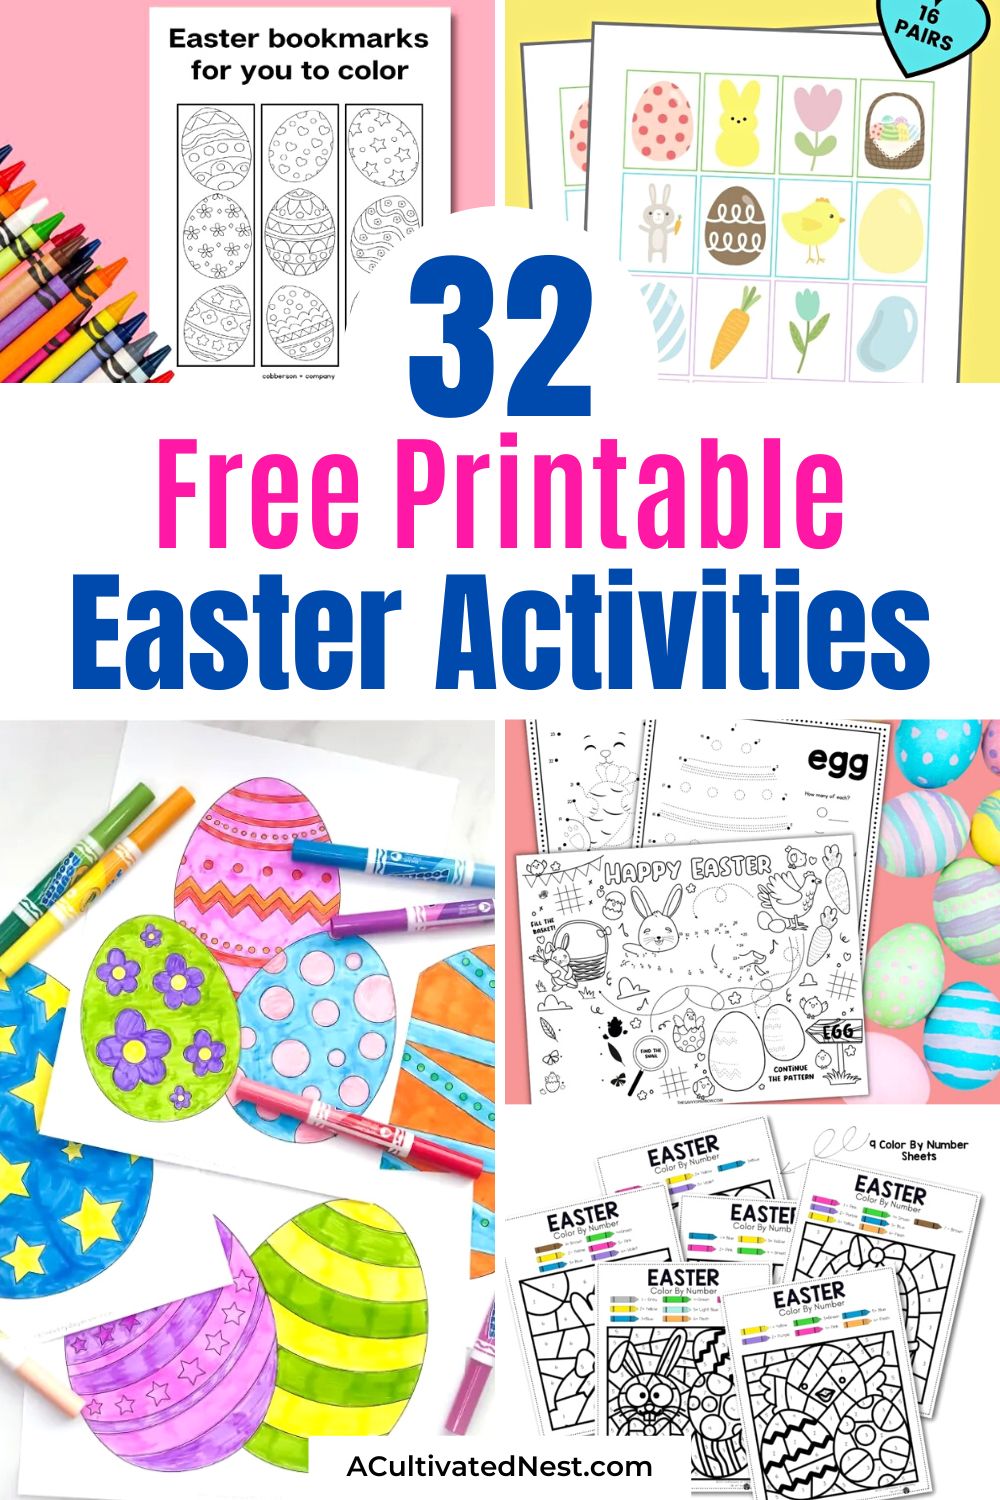 32 Free Easter Printables for Kids- Get ready for Easter festivities with free Easter printables designed just for kids! From cute coloring sheets to engaging games, these printables will keep your little bunnies entertained all season long. | #EasterFun #KidsCrafts #Freebies #activitySheets #ACultivatedNest